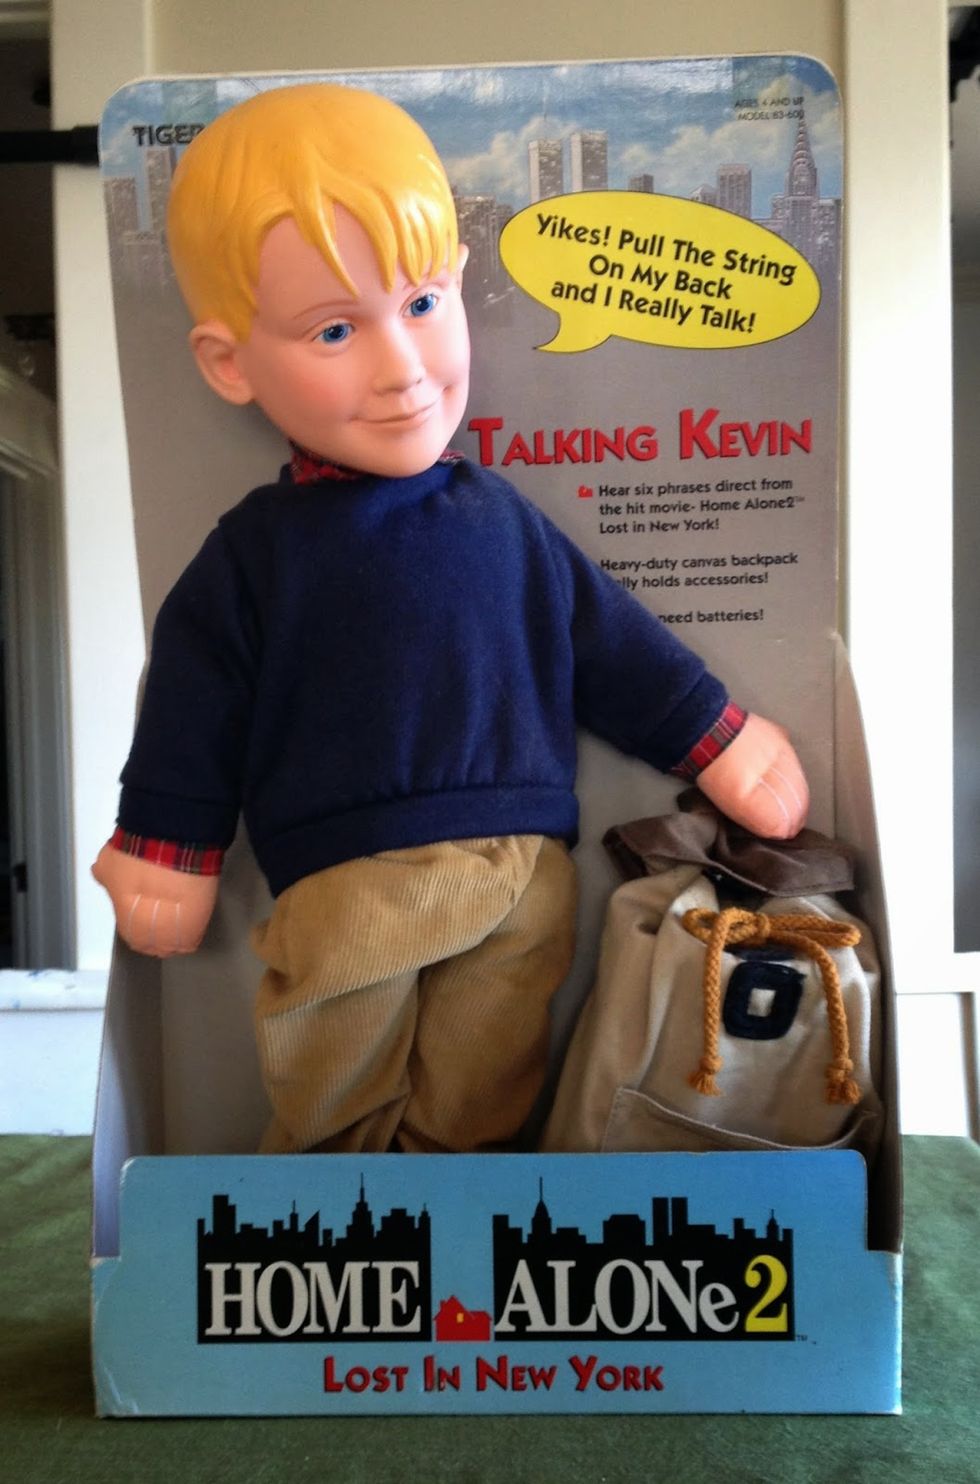 15 things I wish I'd known before spending $55 on a talking Kevin doll from Home Alone 2